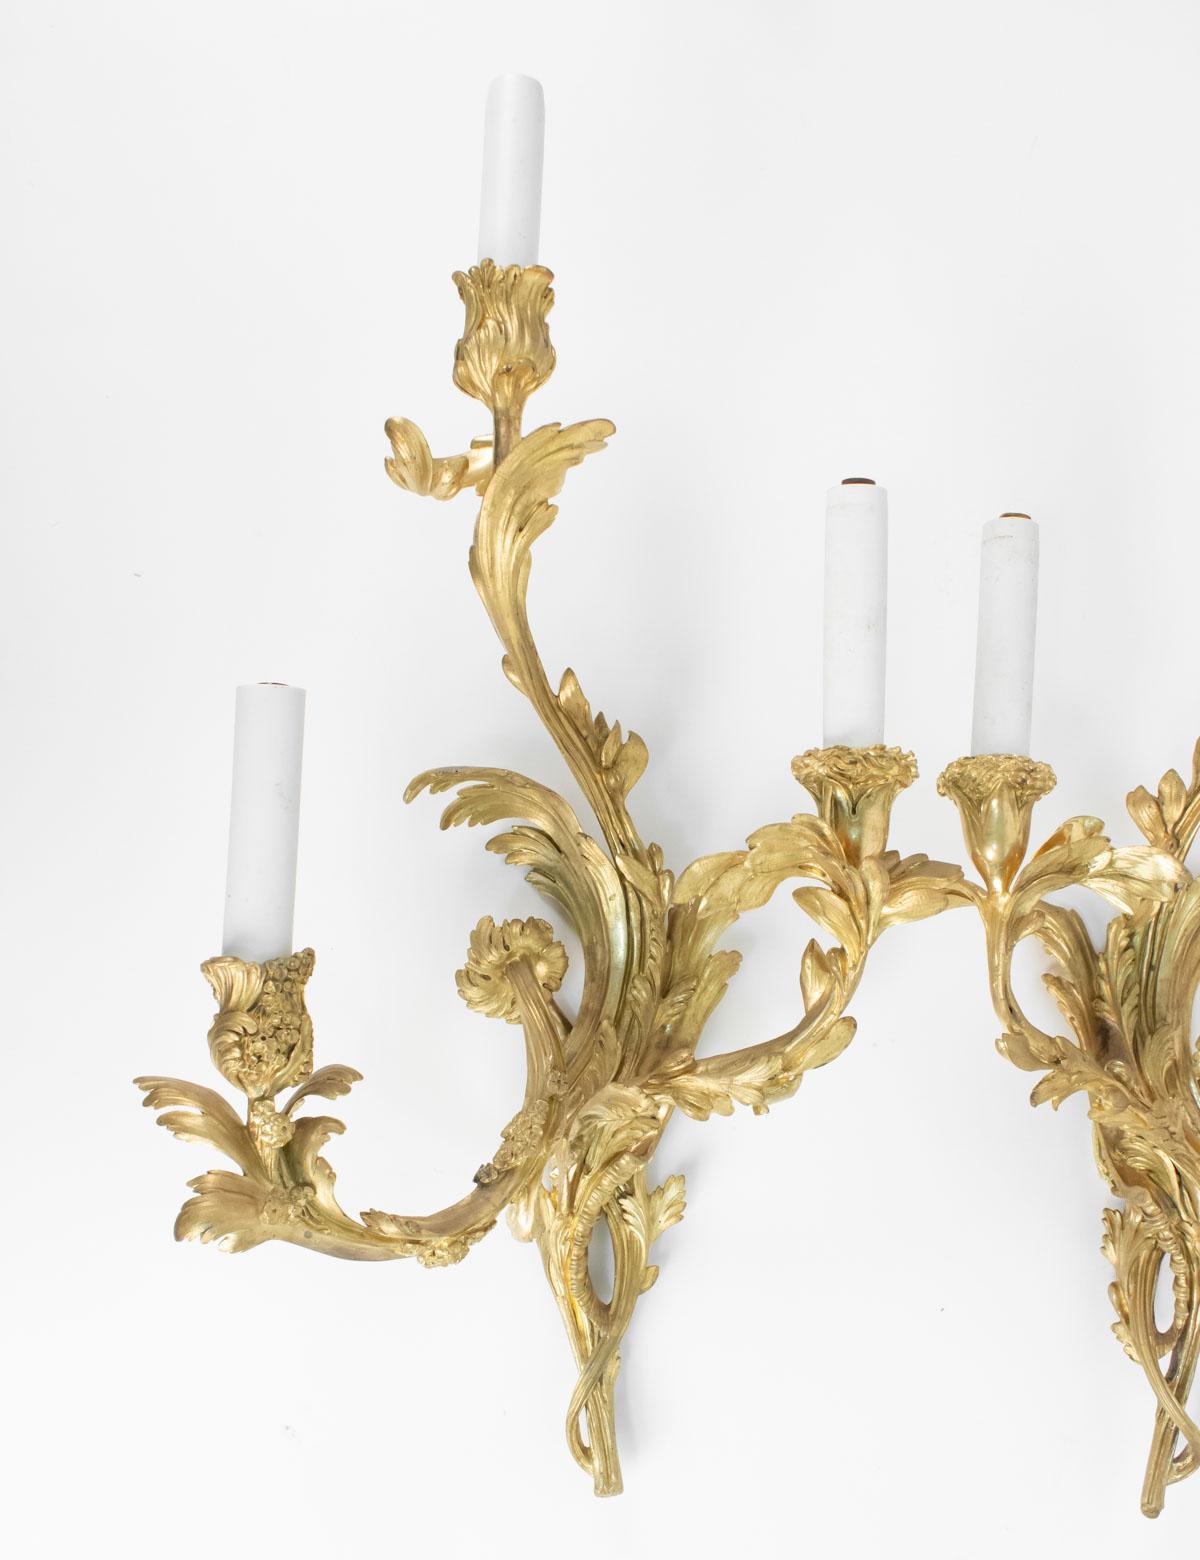 French Pair of Gilt Bronze Sconces from the 19th Century in Louis XV Style